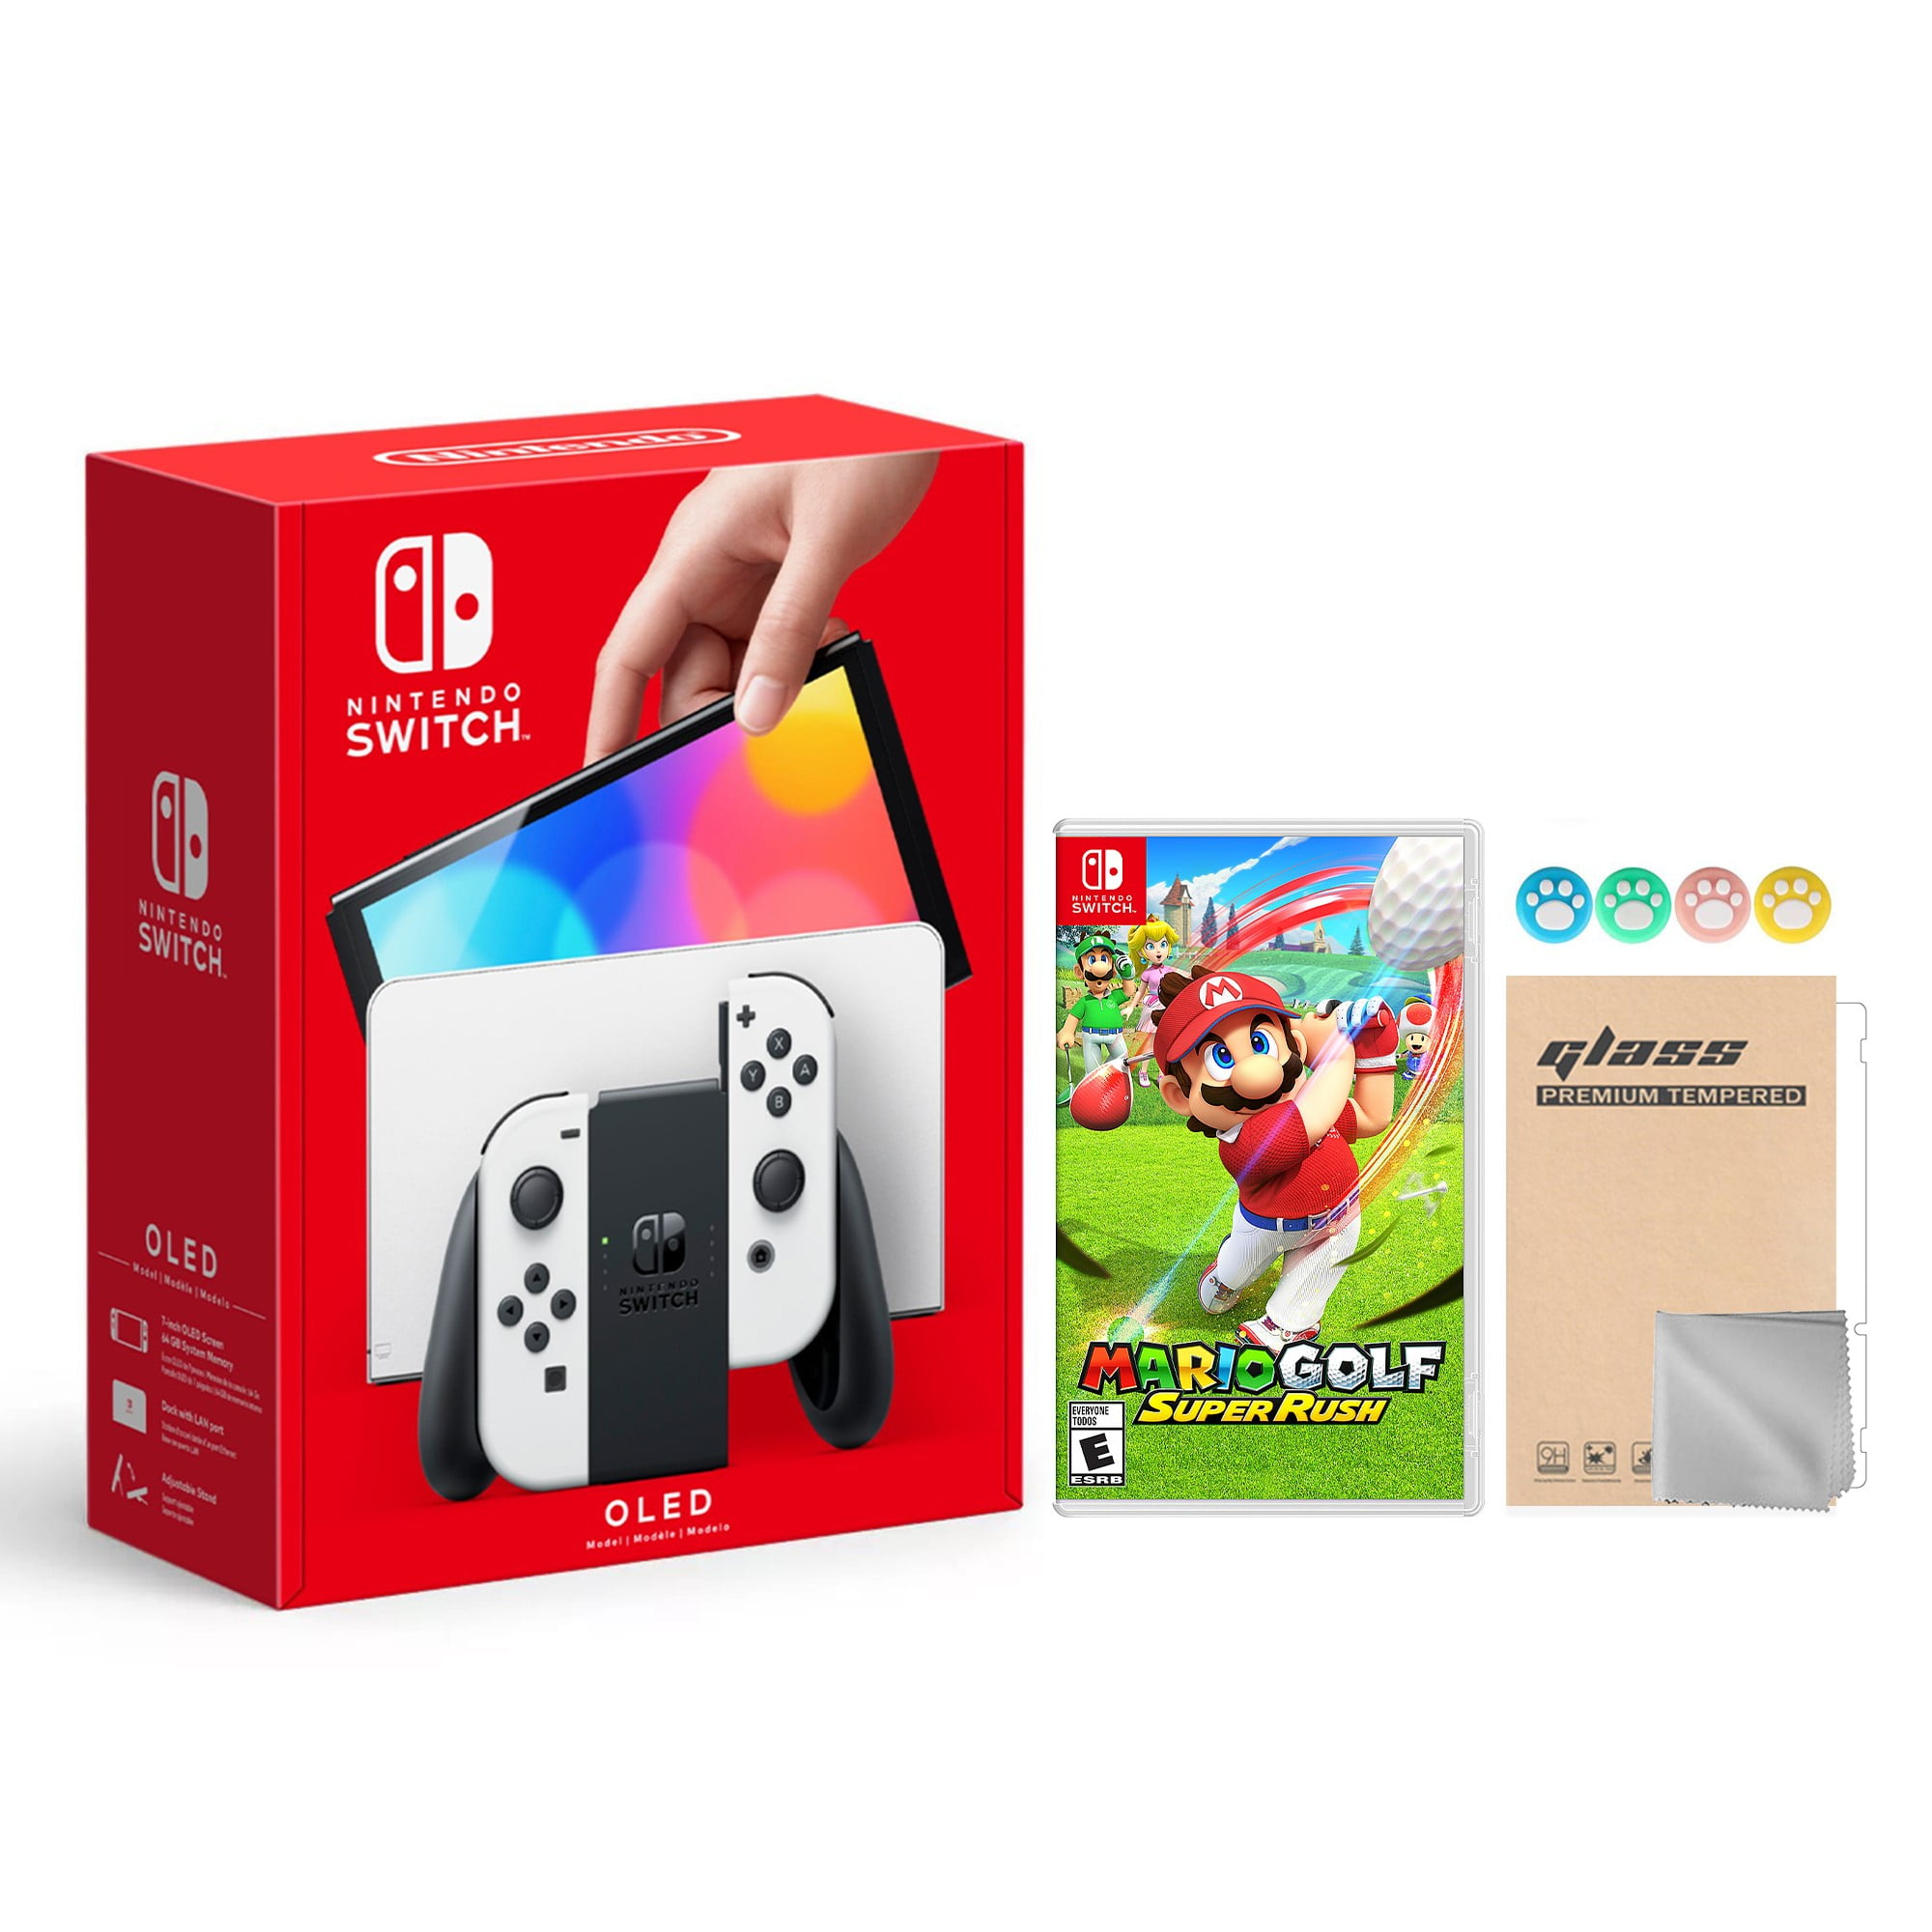 Nintendo Switch Improved Screen Accessories HD And JP Free with Dock Console Sword & Mytrix Model LAN-Port Zelda: Joy of OLED 64GB Con White The Skyward Version - Region HD - Legend